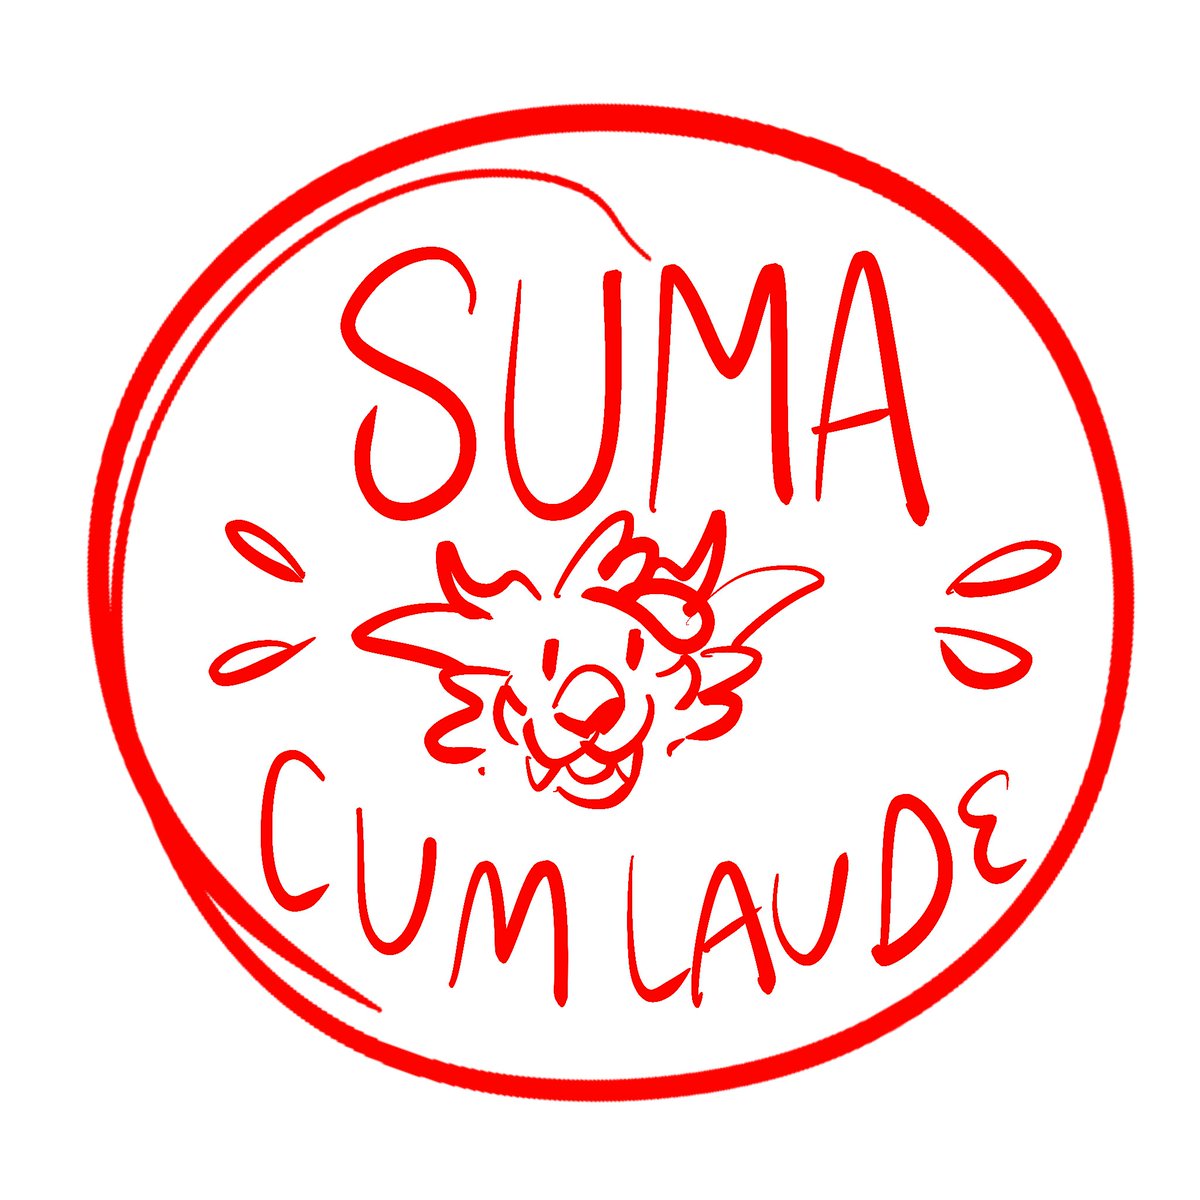 looking back on some of the personal buttons I wanted to make for students — @ShepTheProtogen & @SADSUMA_ were great guinea pigs!!